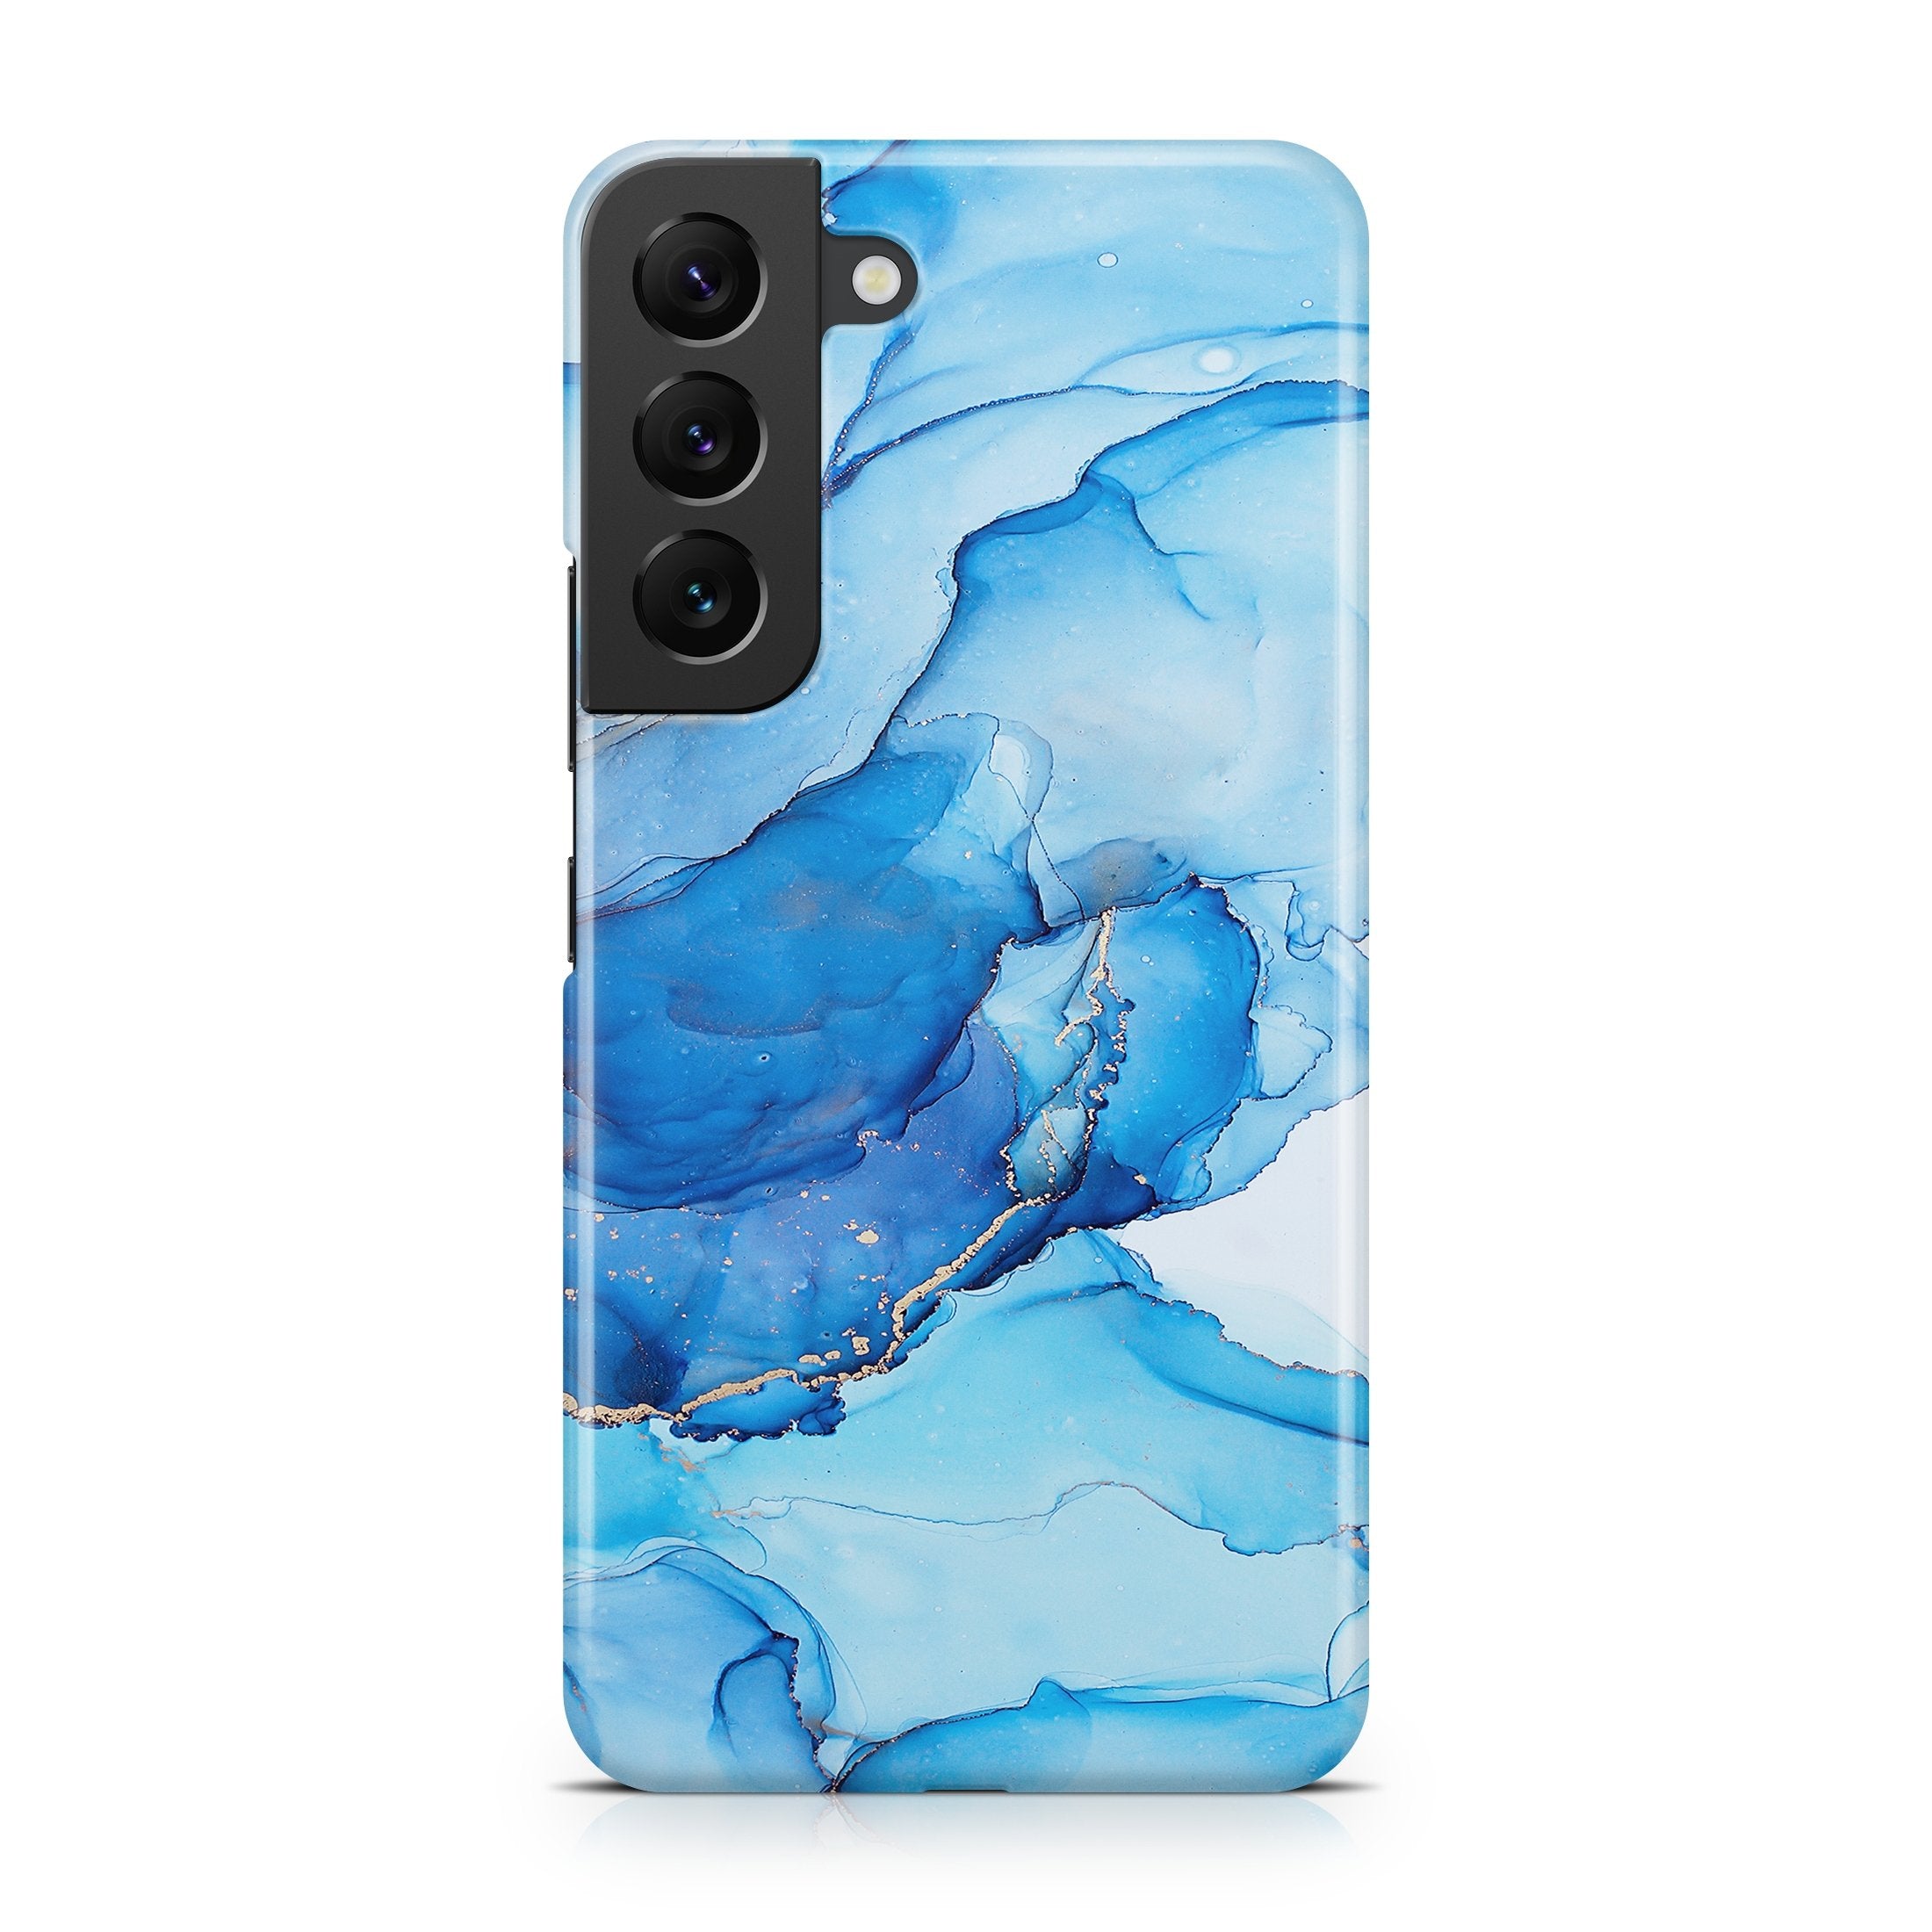 Blue Alcohol Ink - Samsung phone case designs by CaseSwagger